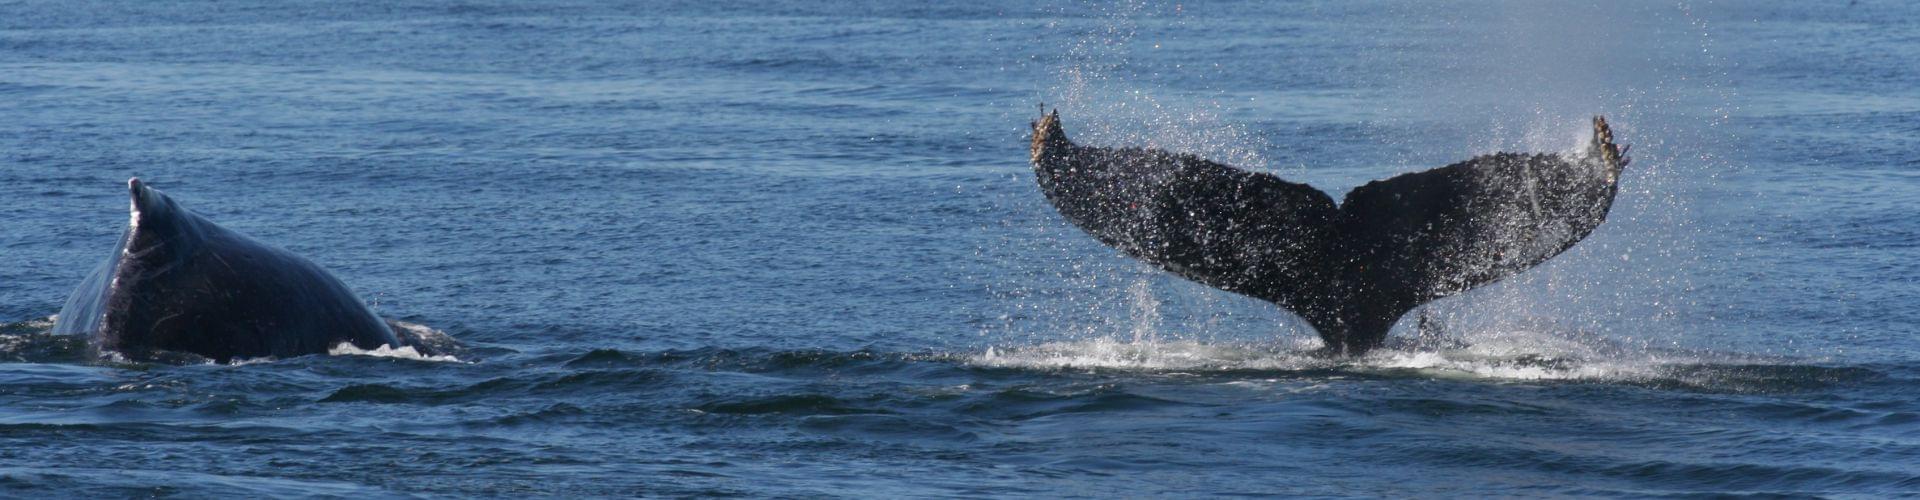 Whale Watching - Other - Puerto Vallarta - Reviews - ellgeeBE